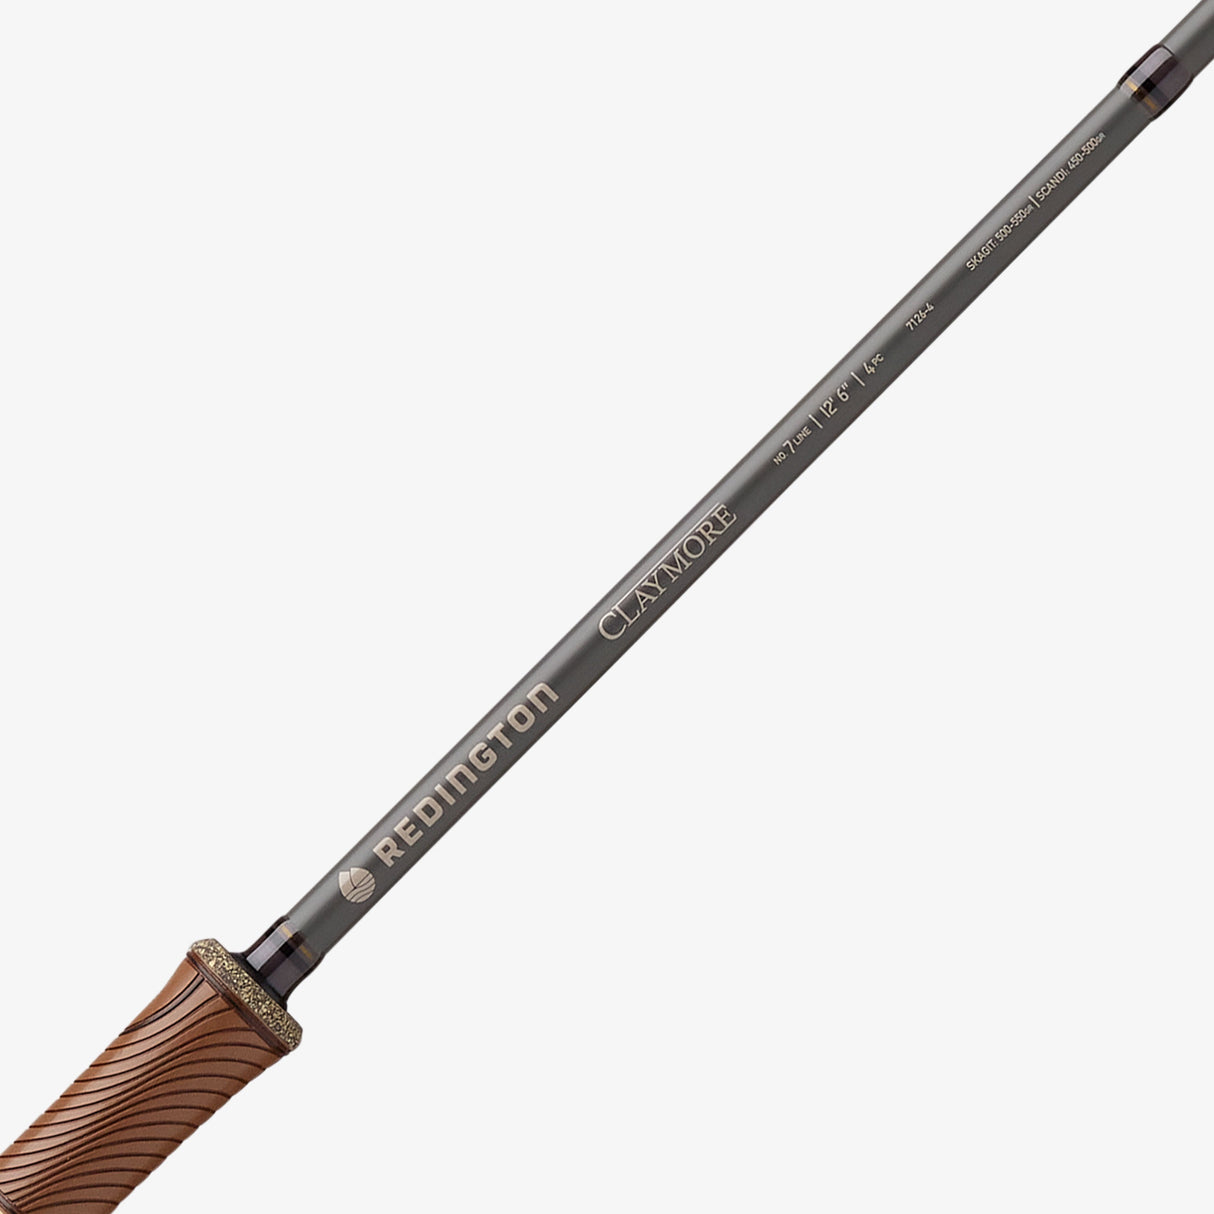 REDINGTON CLAYMORE TROUT SPEY FLY ROD